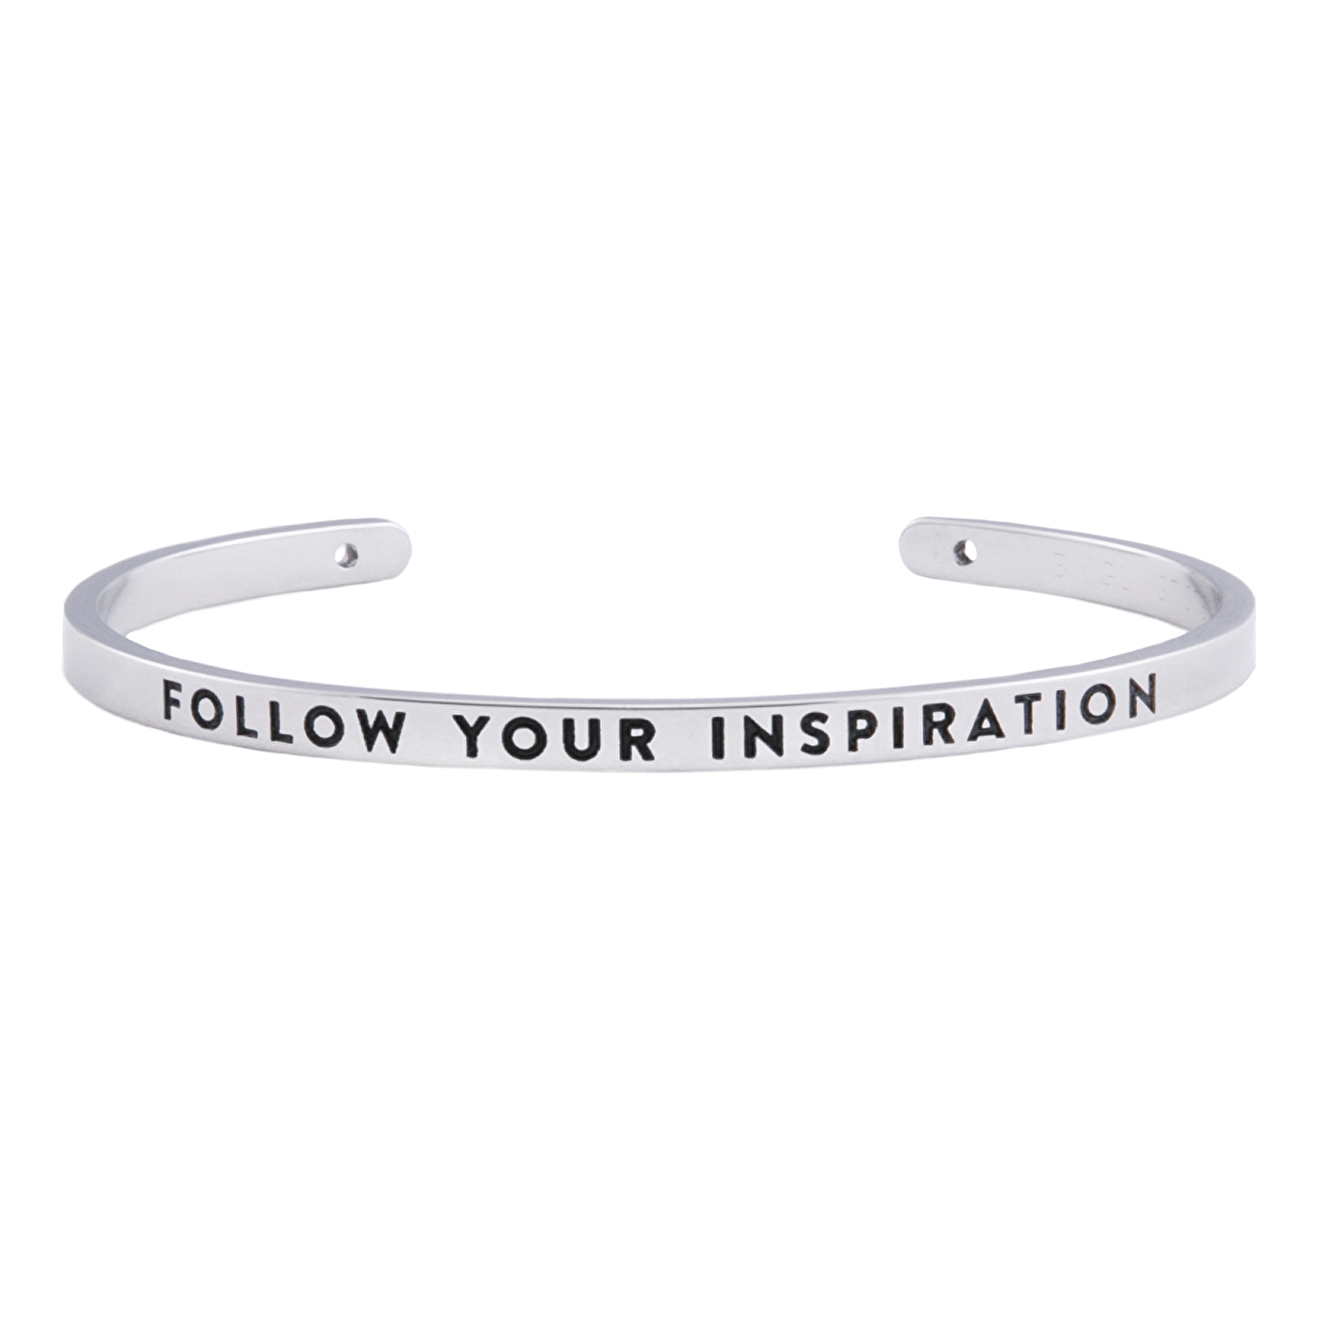 BNGL браслет FOLLOW YOUR INSPIRATION bngl браслет do your best